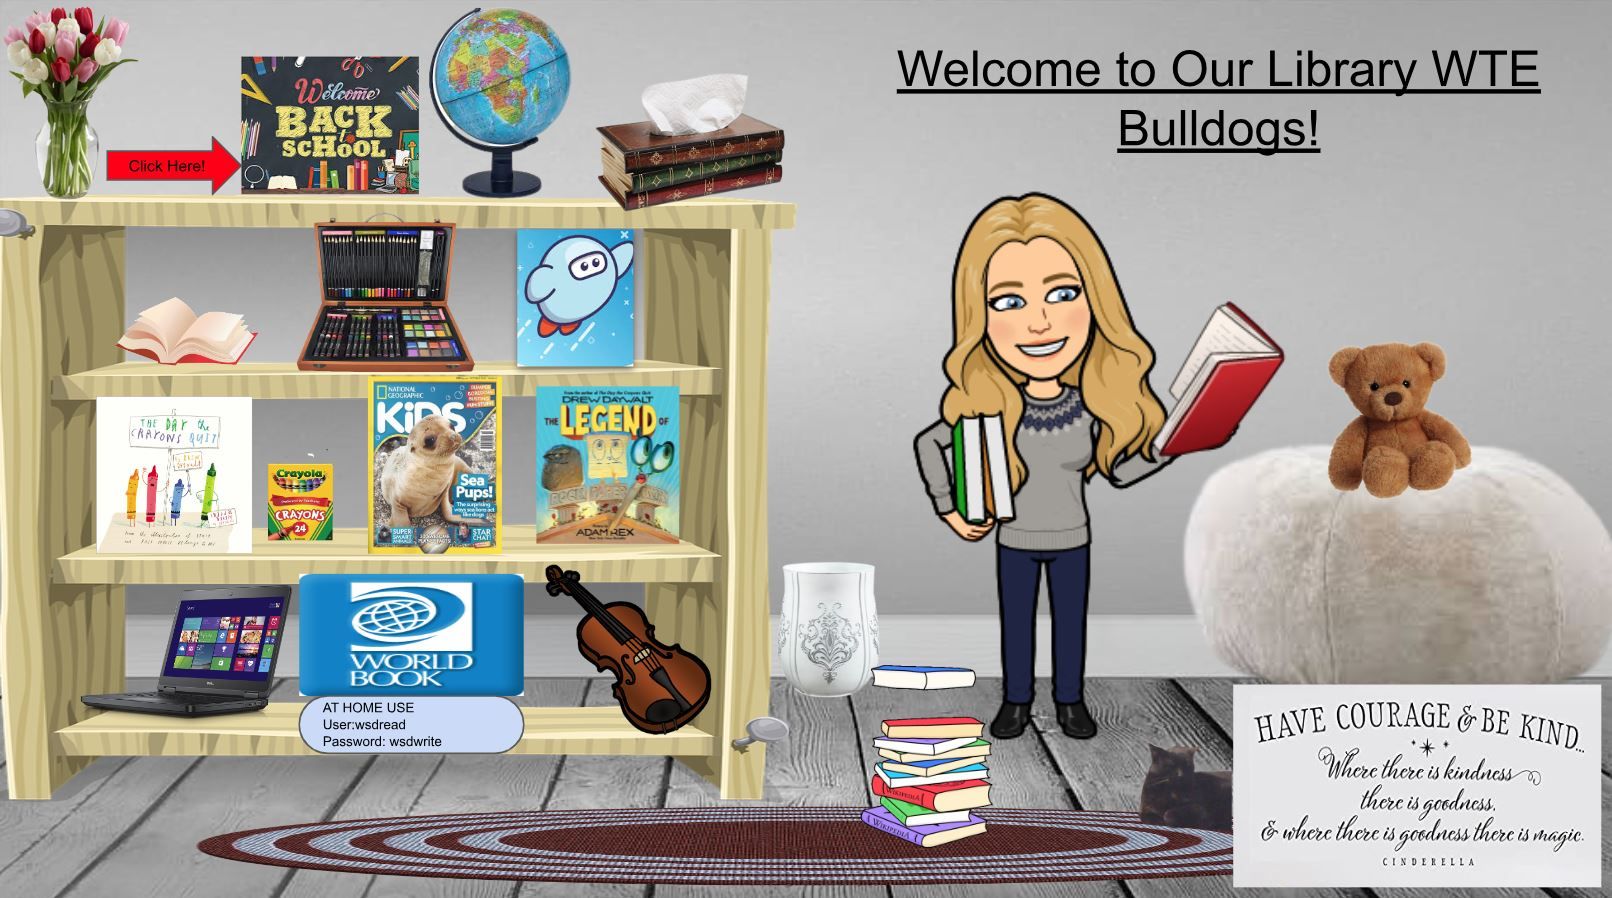 Welcome to our library WTE Bulldogs!